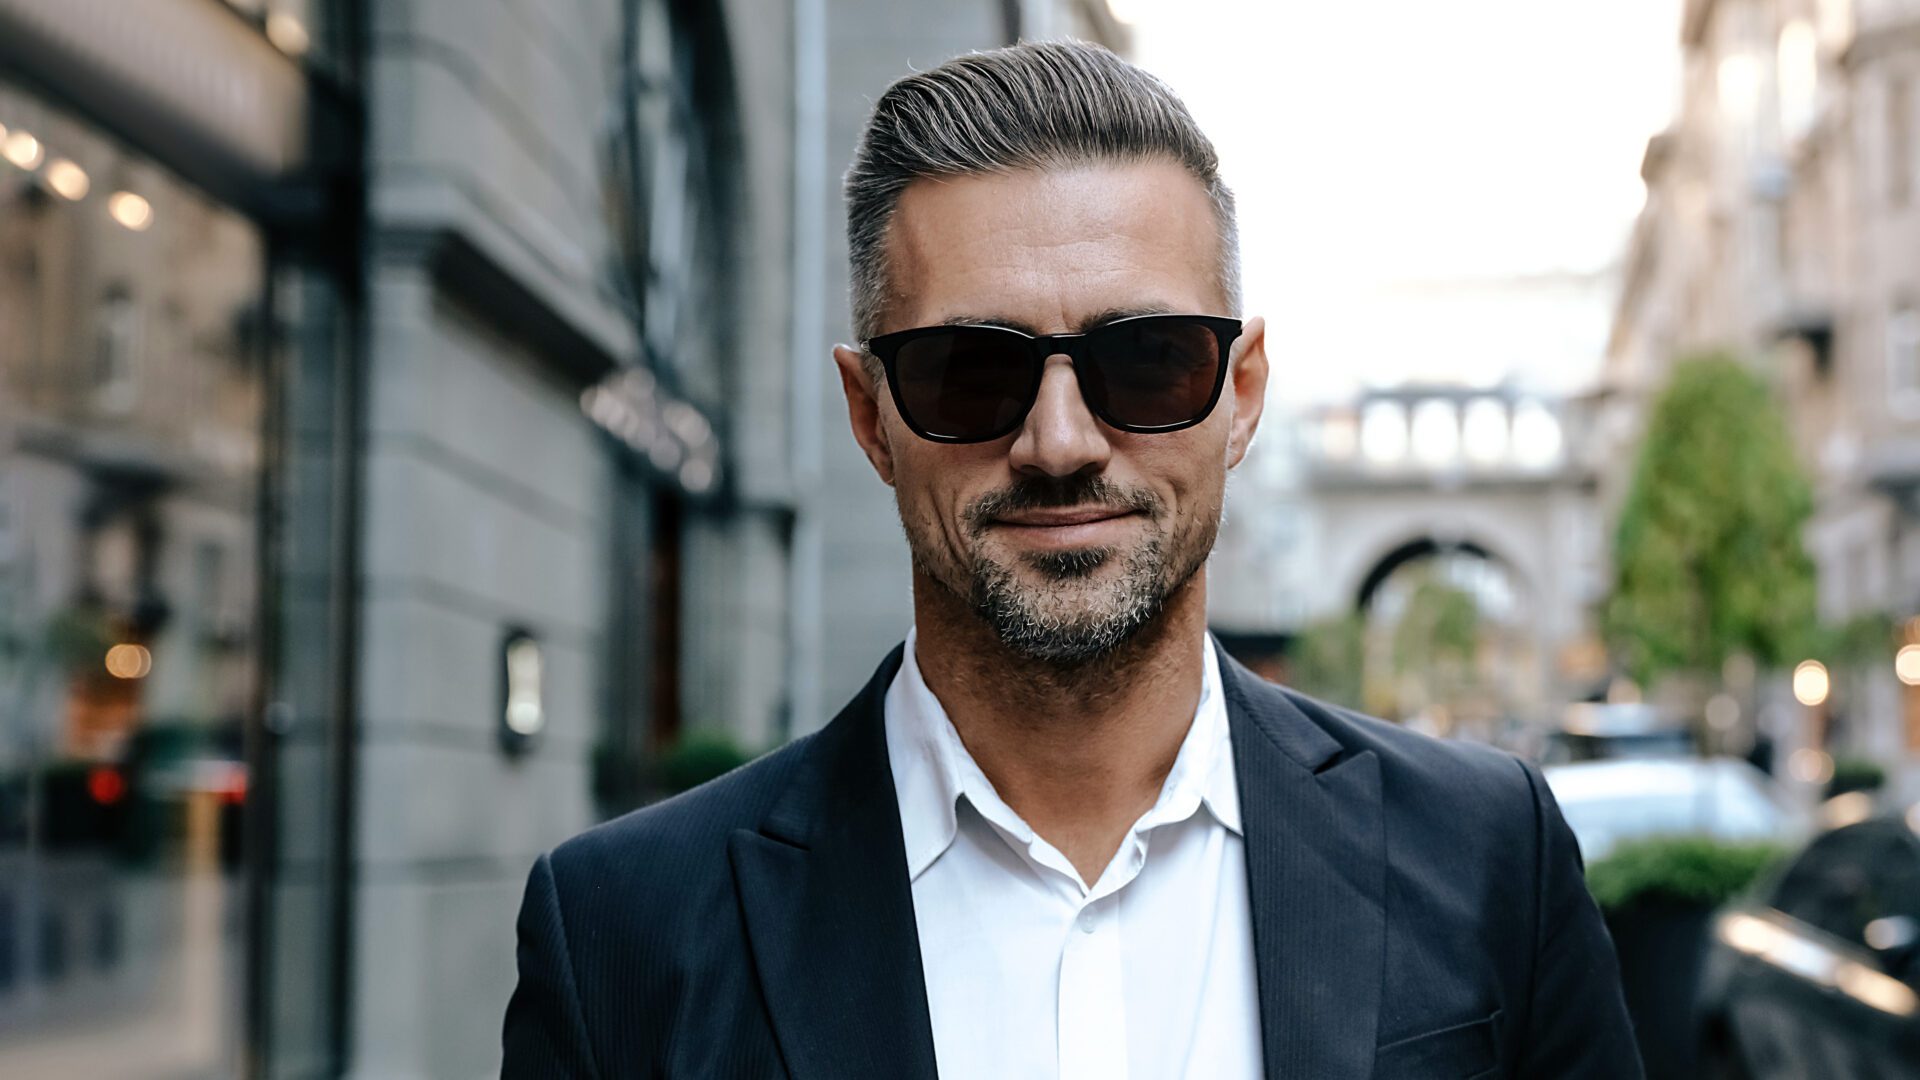 Mens Grey Hairstyles The Hottest Looks of The Season  All Things Hair US